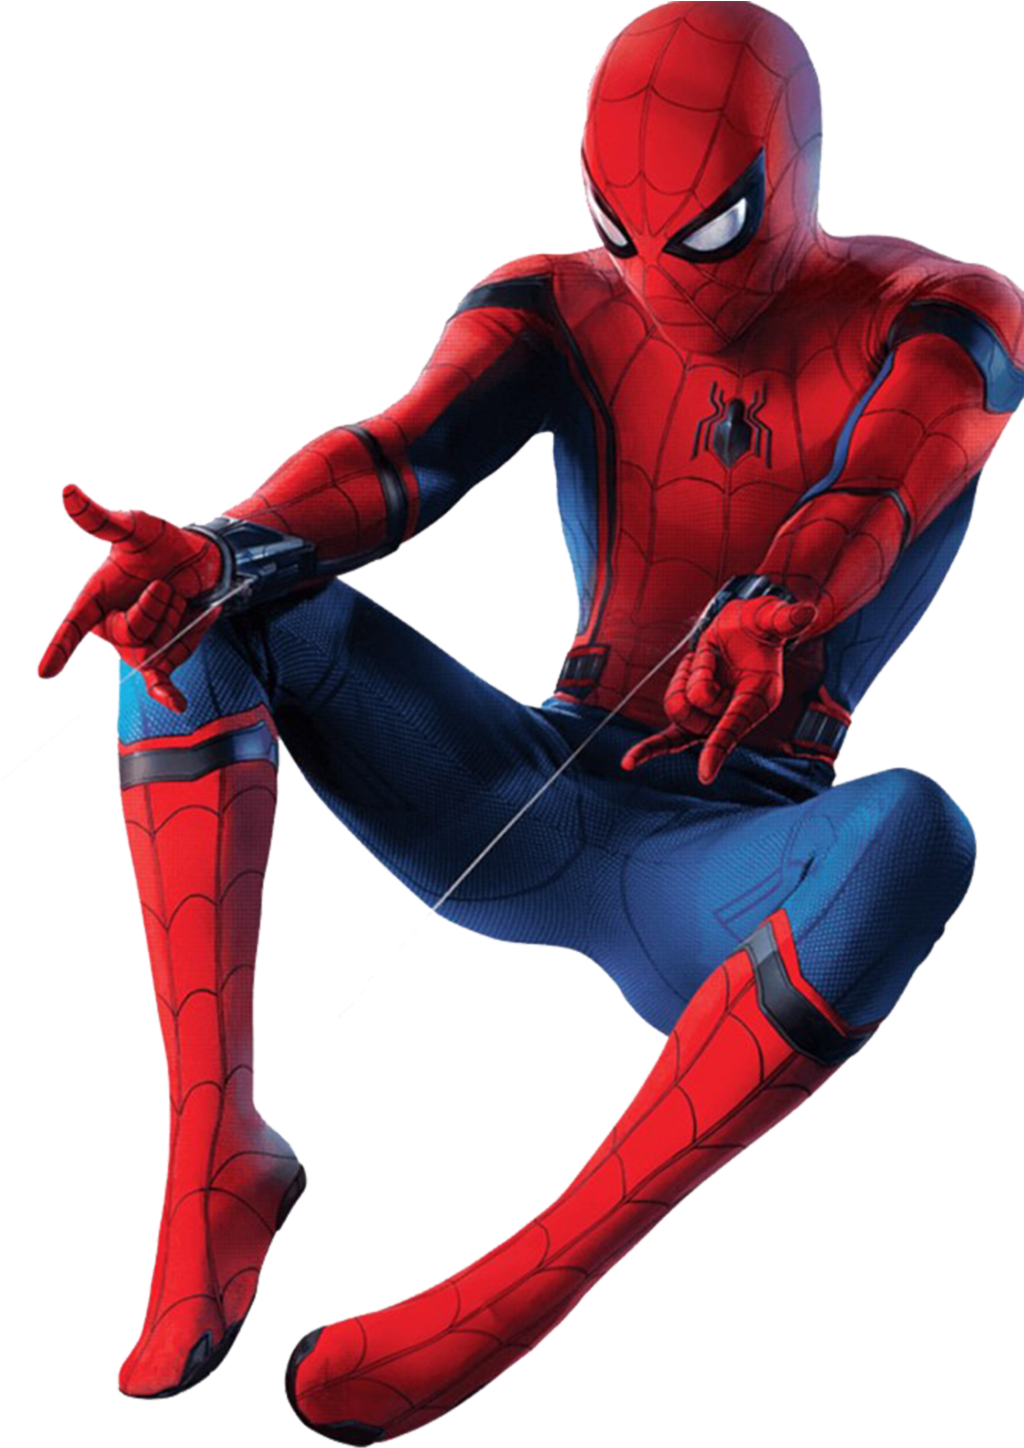 Download and share clipart about Spider Man Homecoming Render, Find more hi...